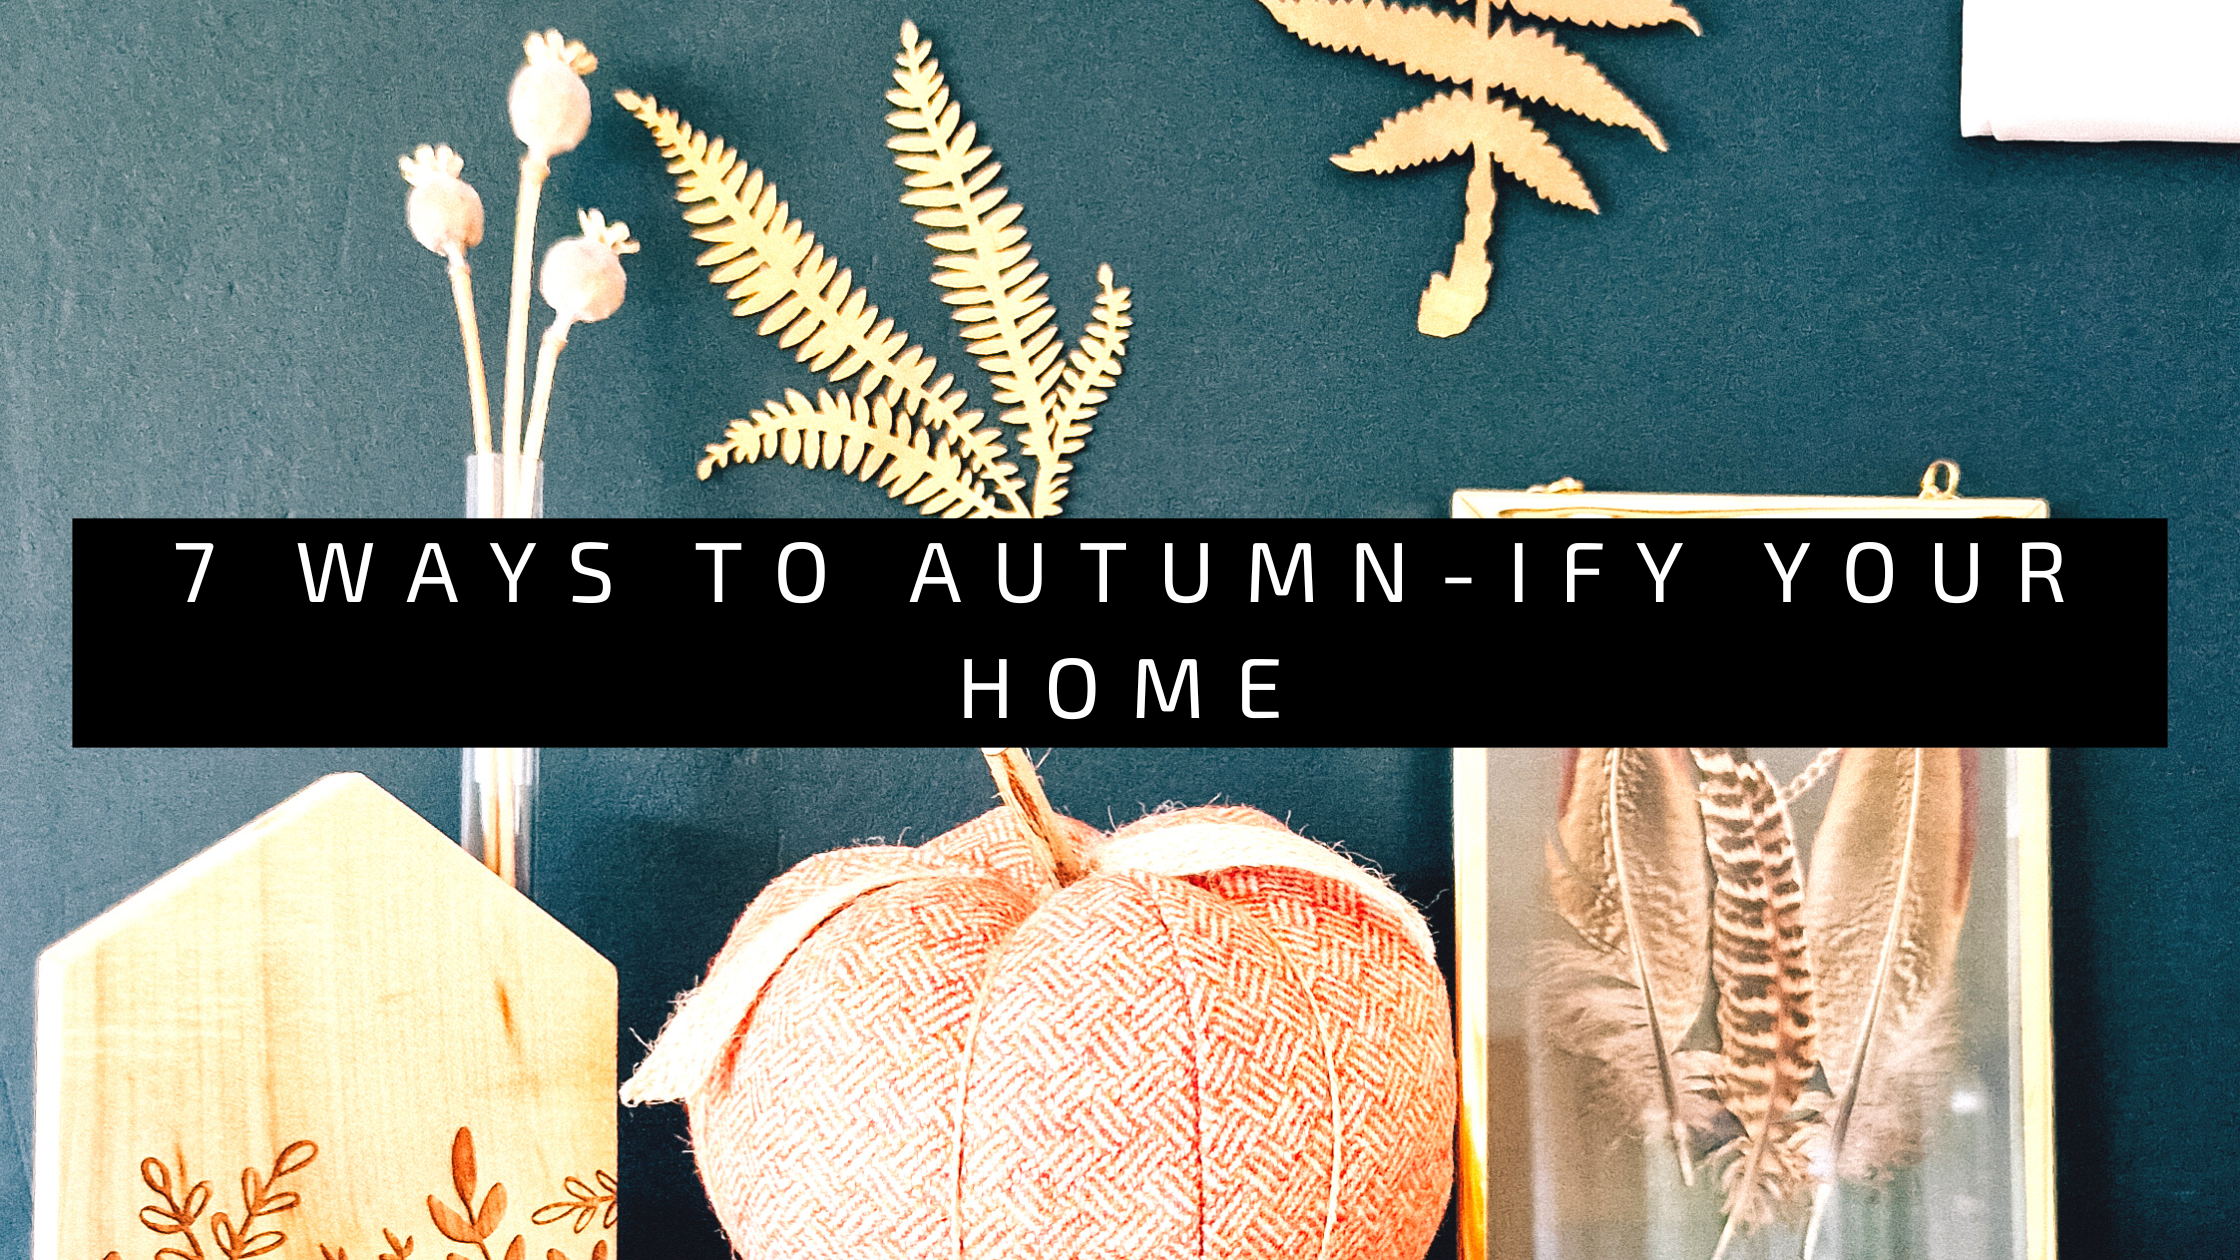 7 Ways to Autumn-ify your Home